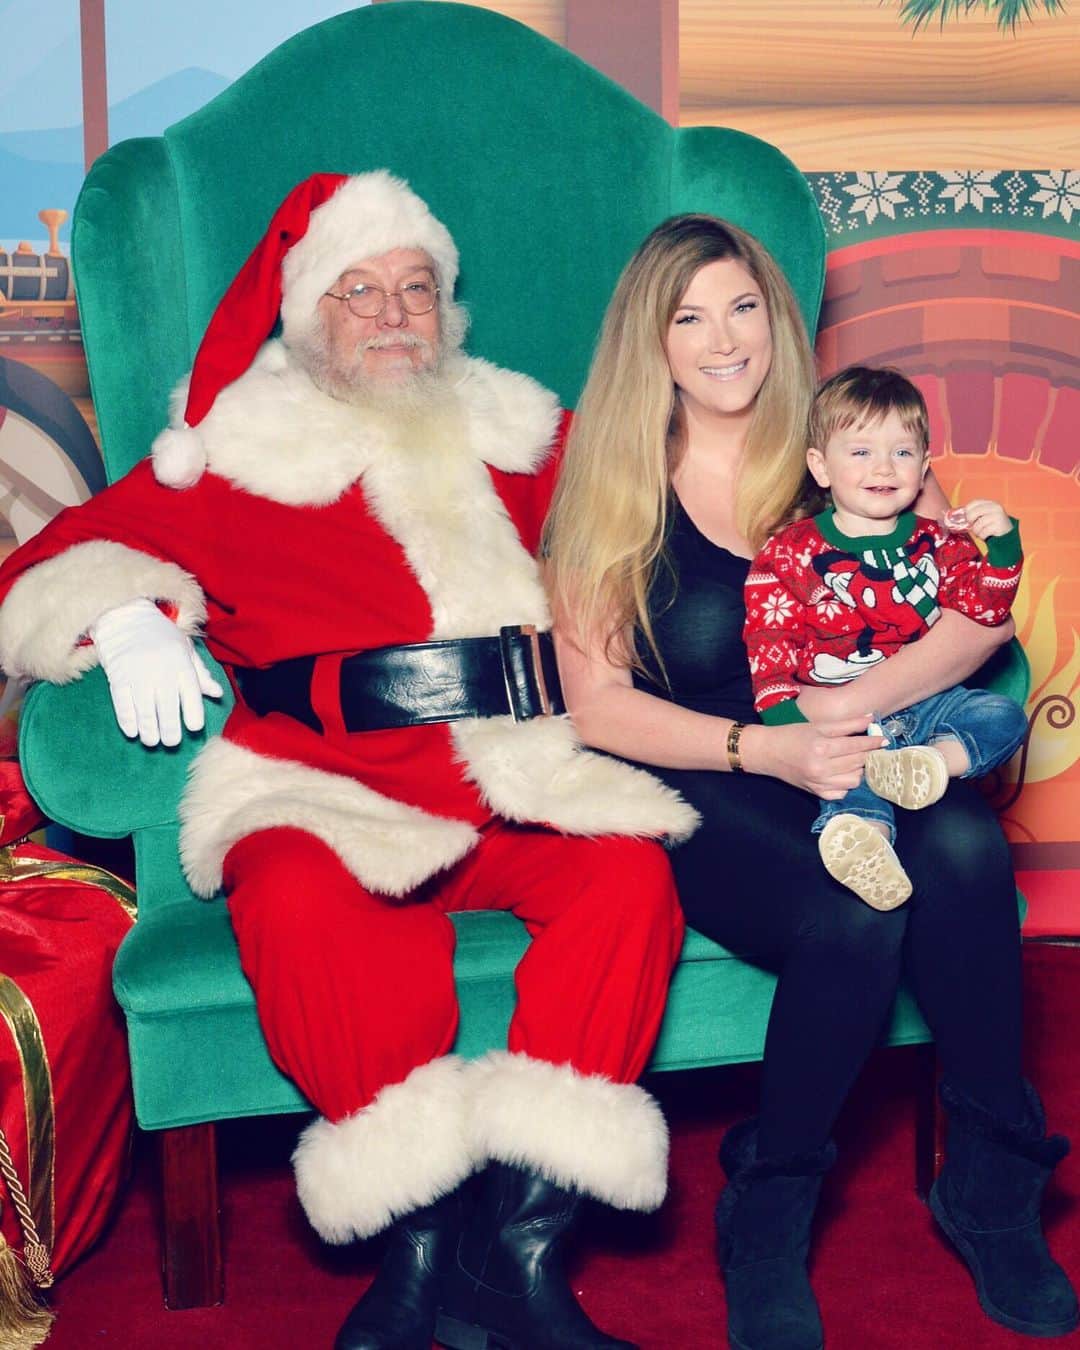 Elle Fowlerのインスタグラム：「James met Santa today! He was scared and didn’t want to go alone so I sat with him - no need to traumatize the littles 🎄🎅🏻 I would have worn a festive sweater if I had known I would be in the picture lol!」